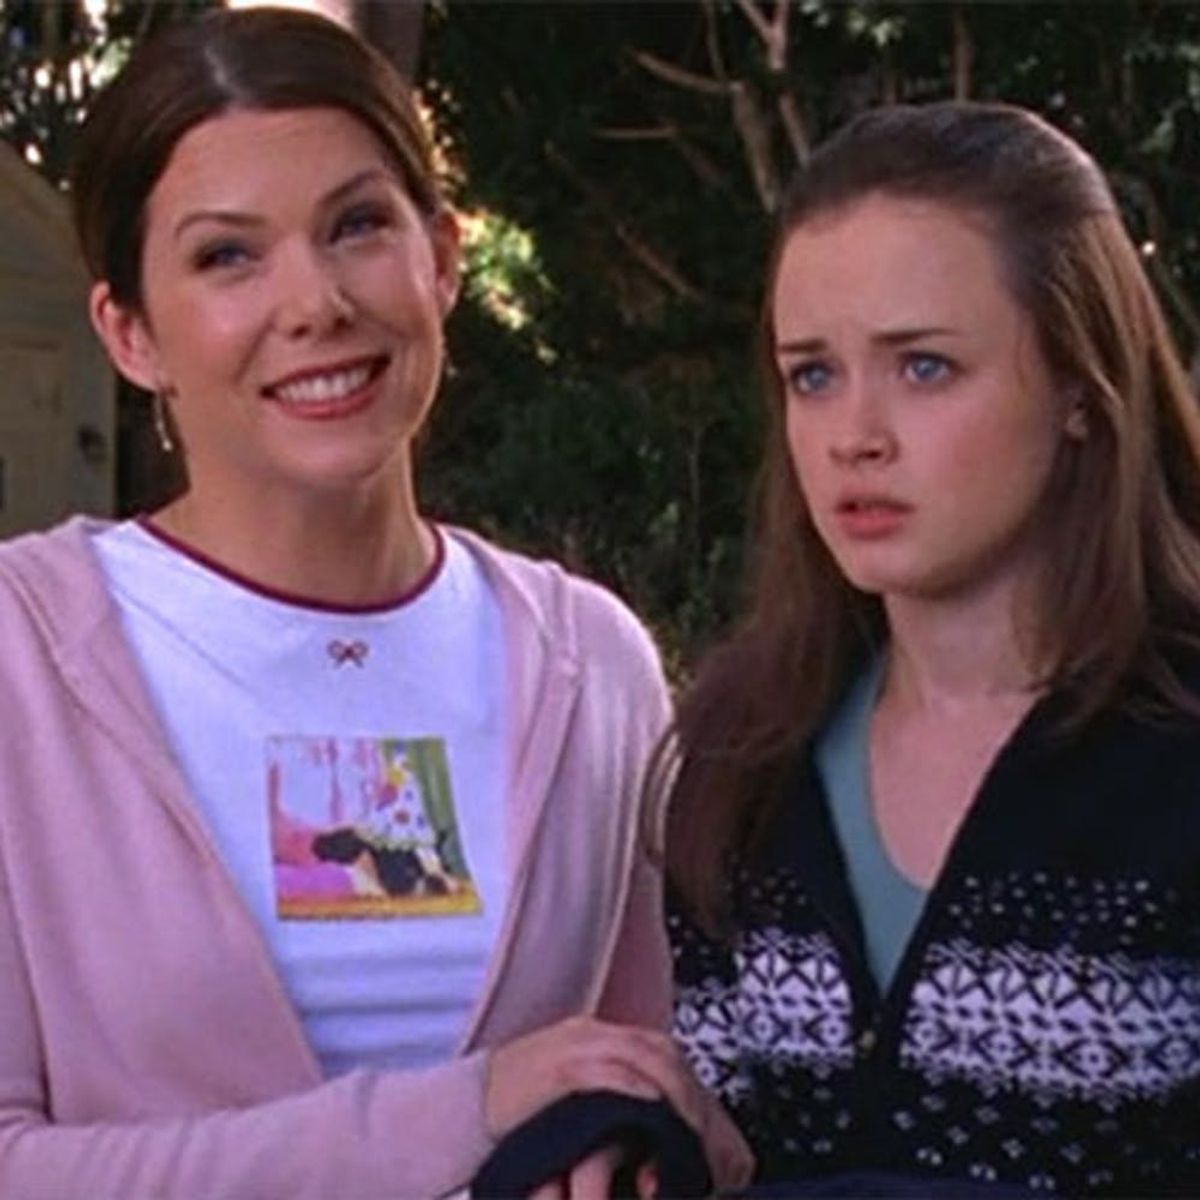 Here Are the Most Shocking Possibilities for the New Gilmore Girls Episodes